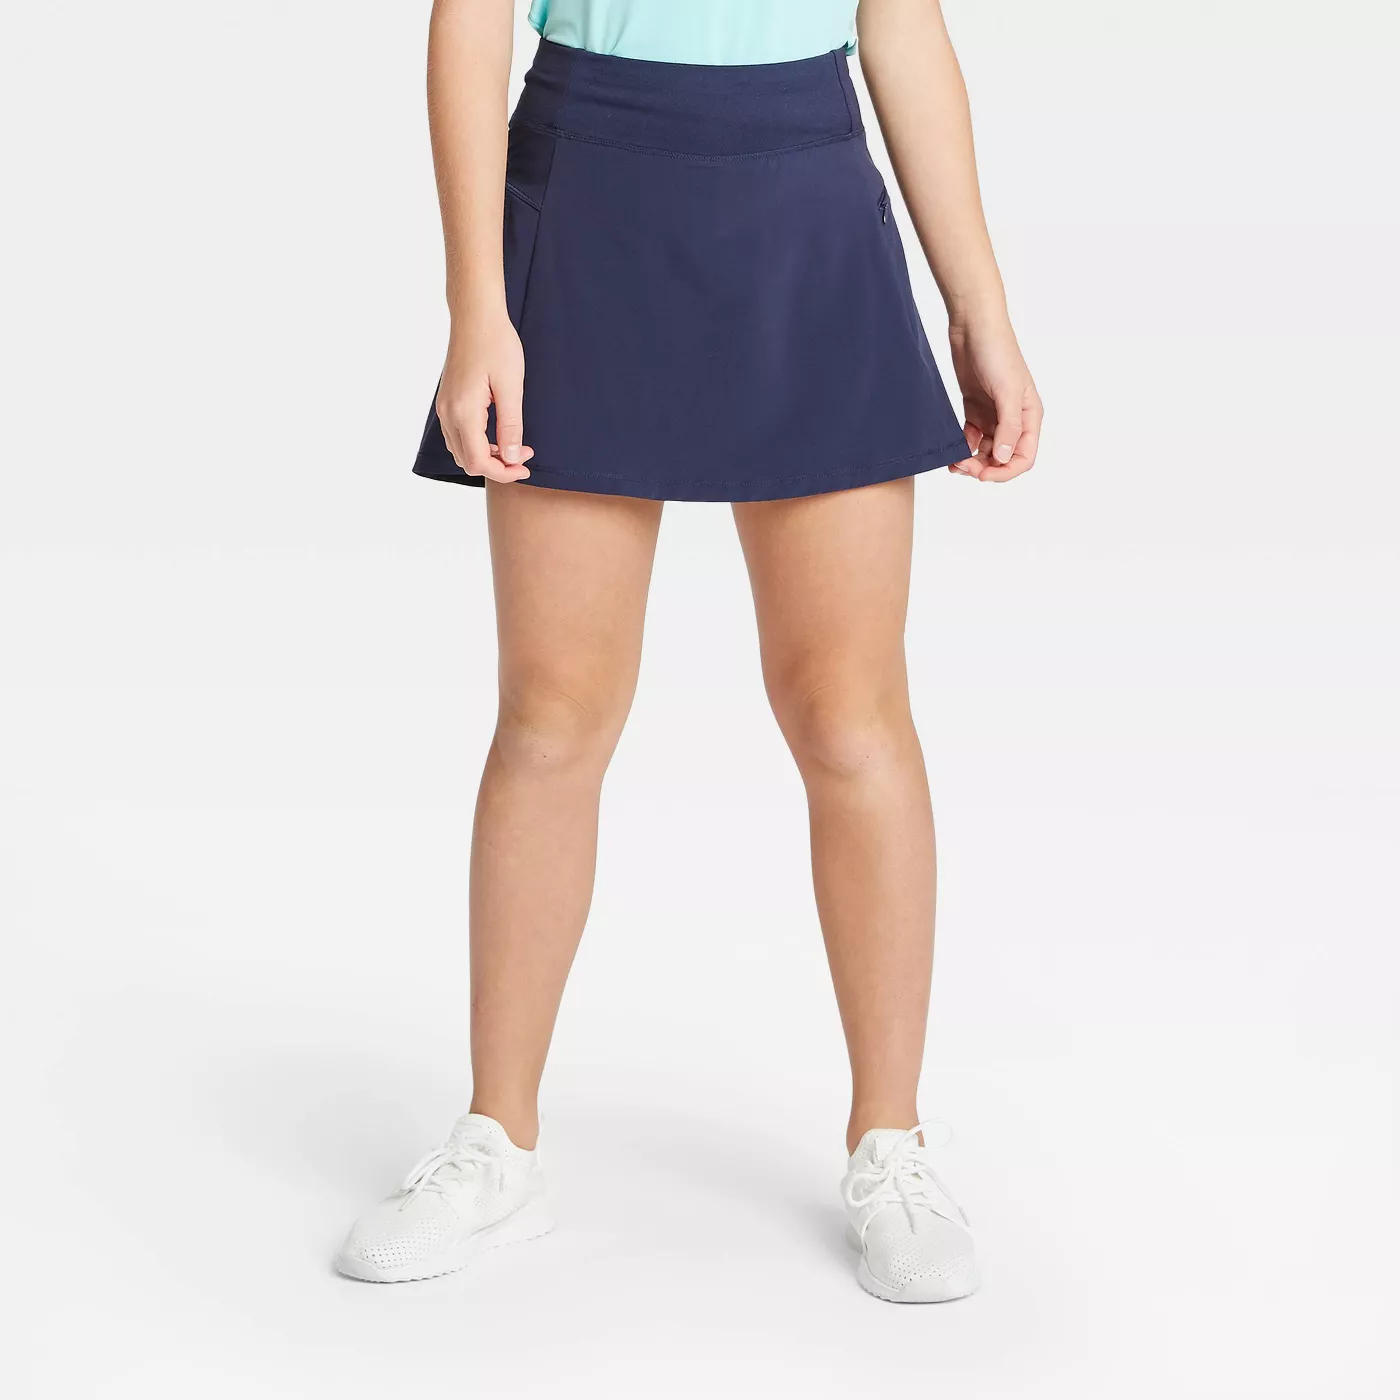 Girls' Stretch Woven Performance Skort - All in Motion™ - image 1 of 2